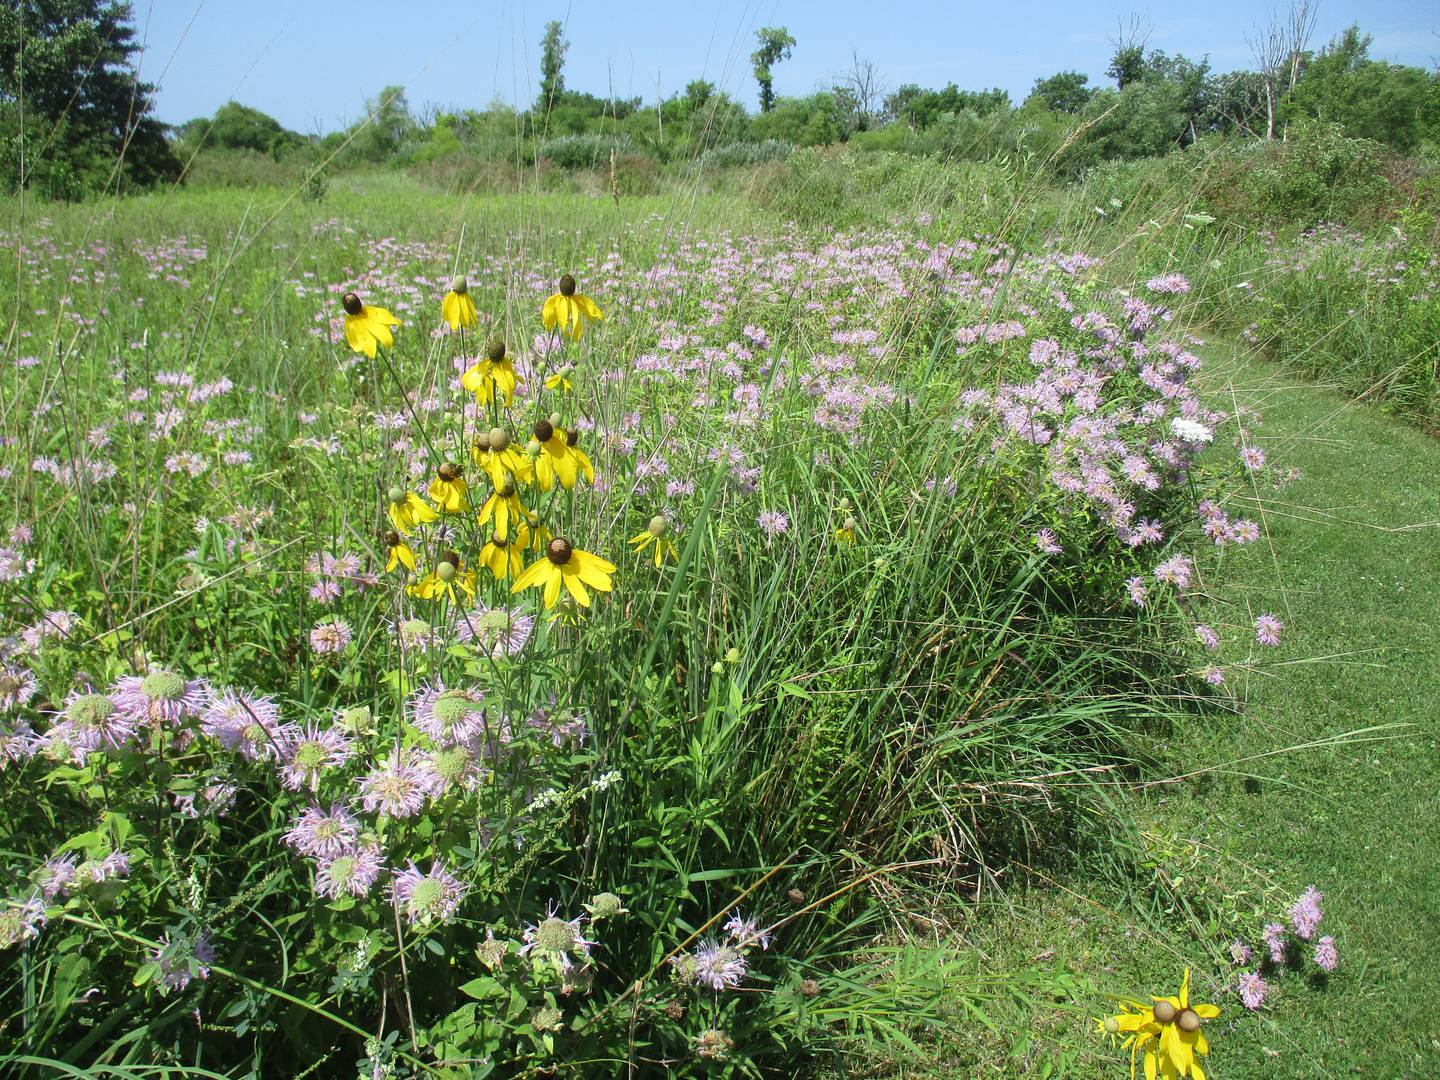 Lavender-colored wild bergamot and the the grey headed coneflower with its yellow petals were blooming in the Subat Forest Preserve in Plano on July 28, 2023.